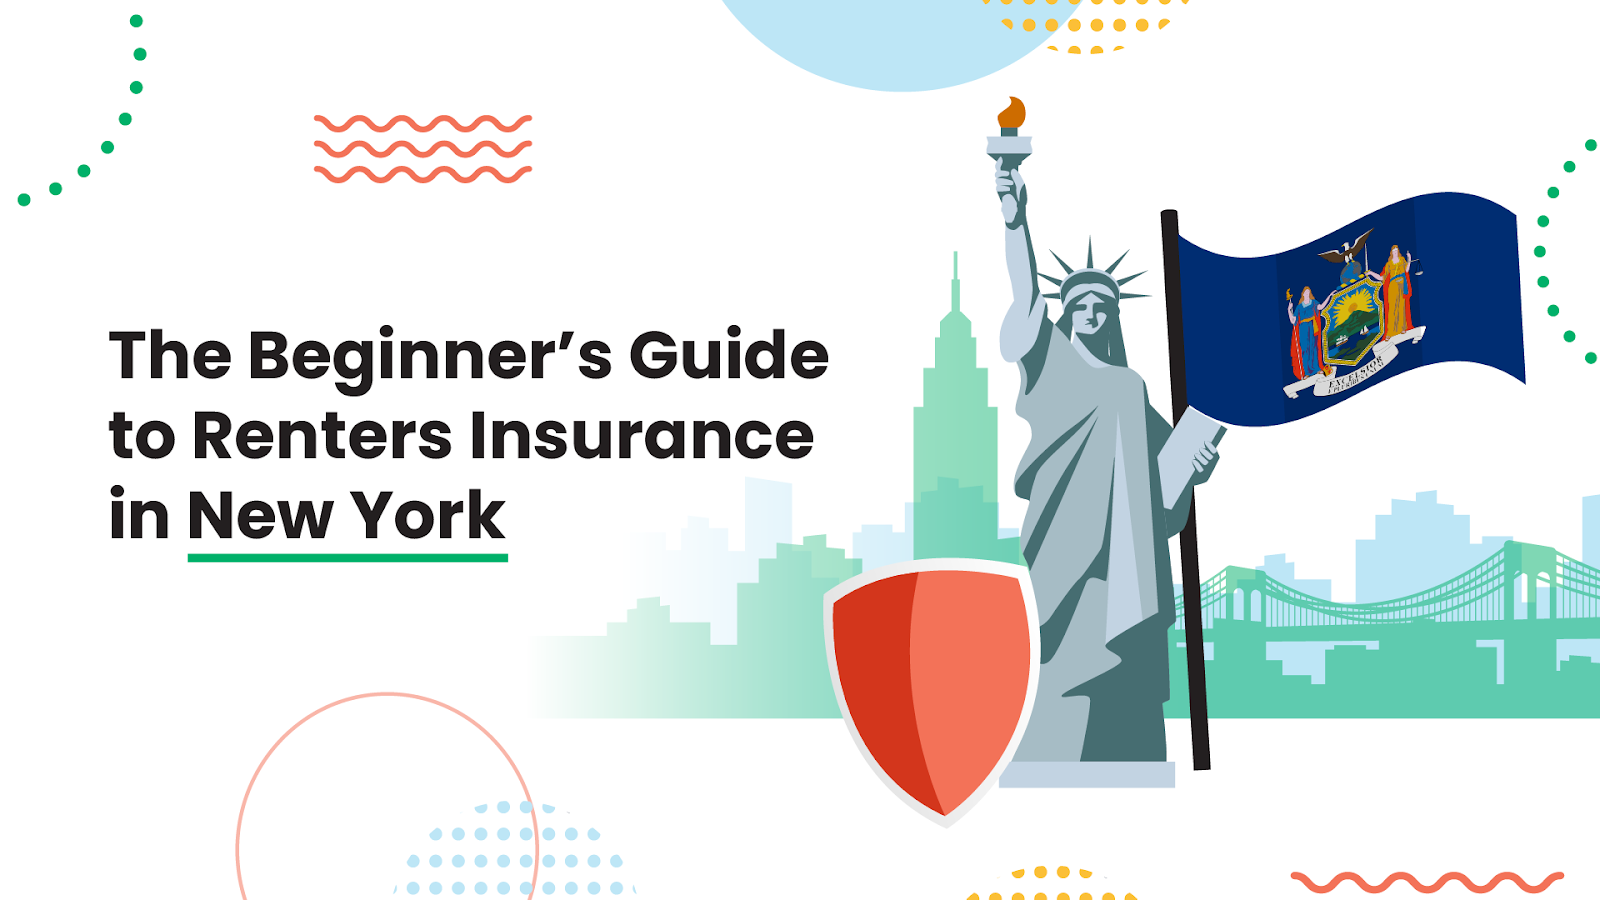 The Beginner’s Guide to Renters Insurance in New York.